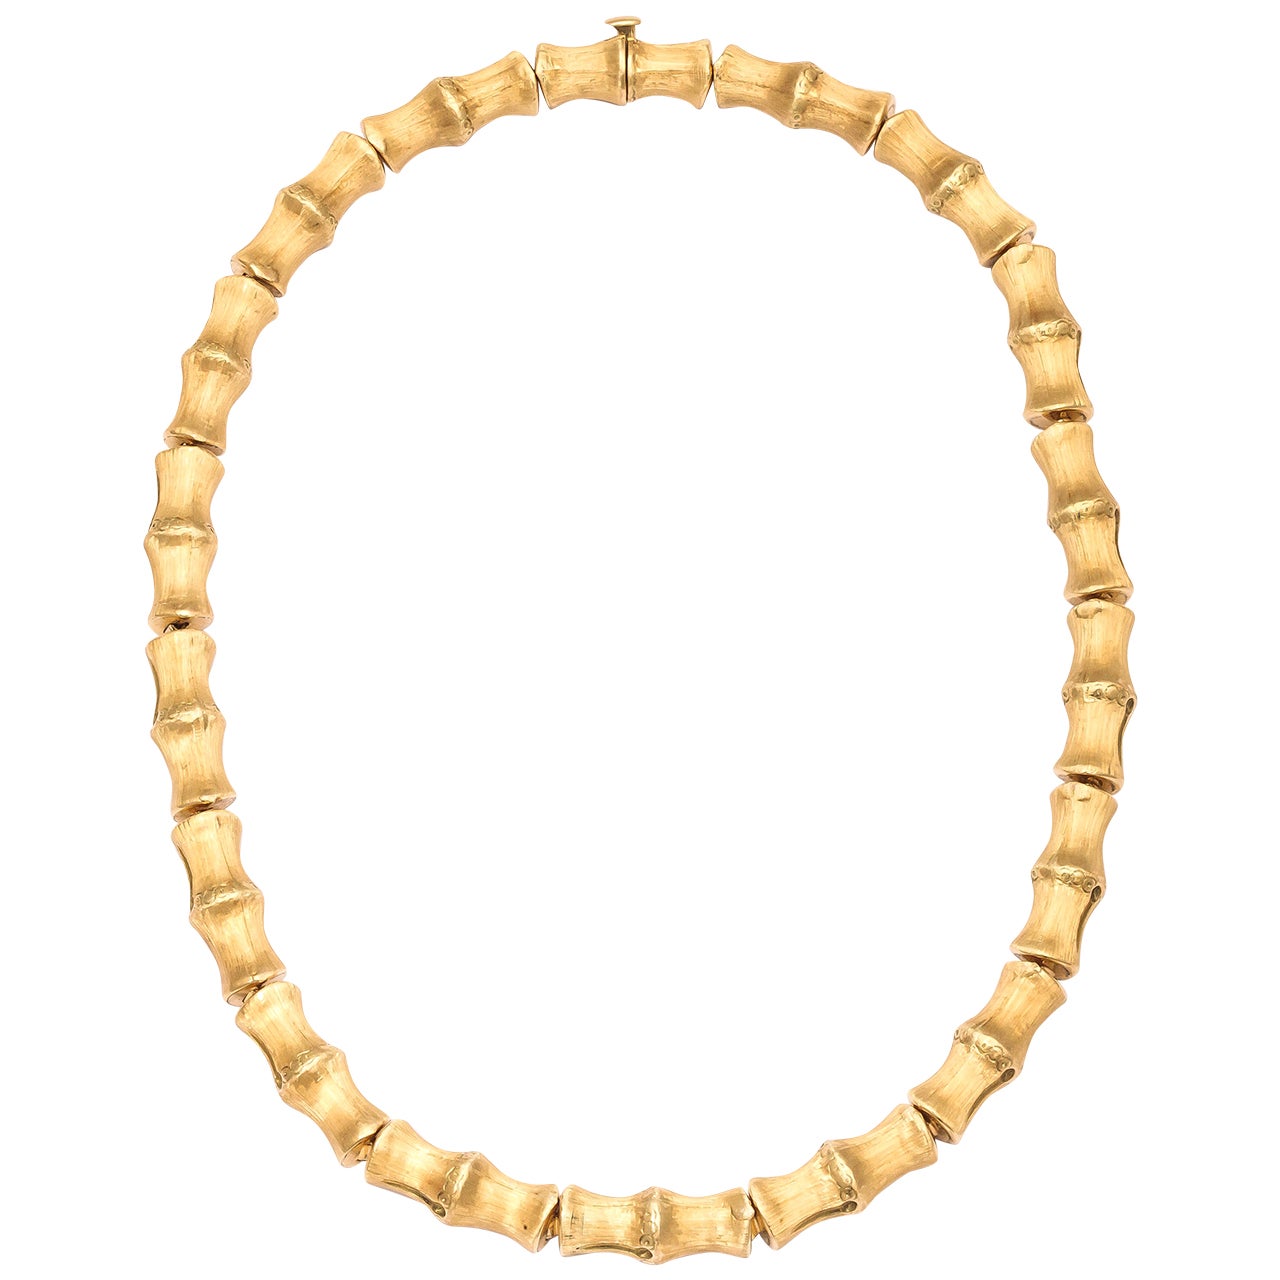 Segmented Gold Bamboo Necklace